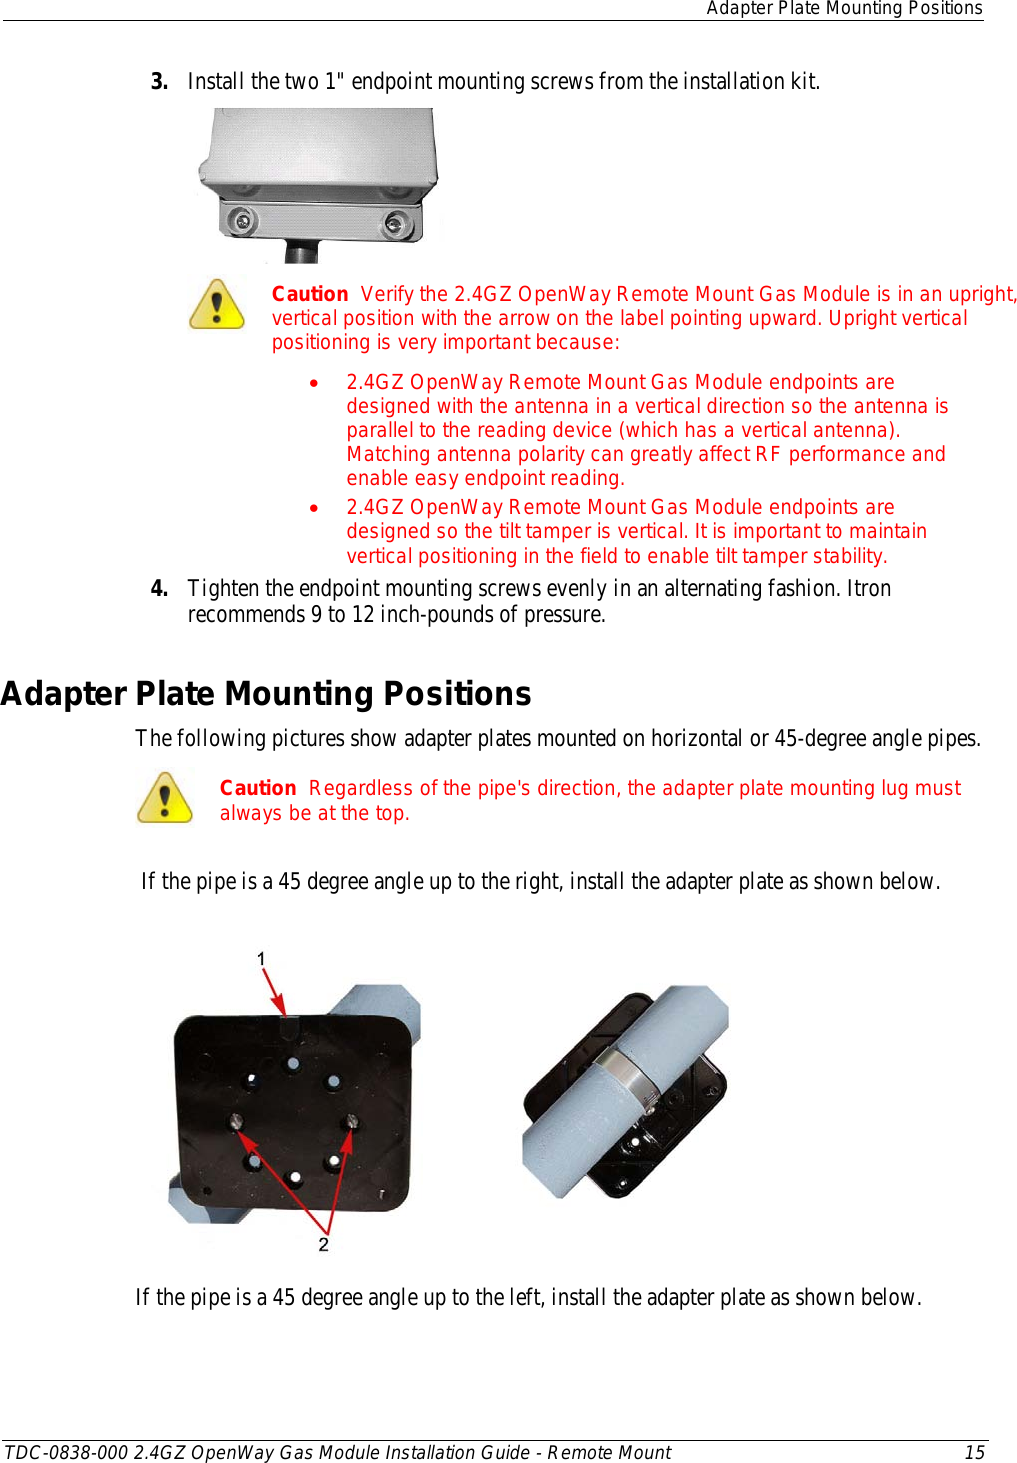  Adapter Plate Mounting Positions  TDC-0838-000 2.4GZ OpenWay Gas Module Installation Guide - Remote Mount 15  3. Install the two 1&quot; endpoint mounting screws from the installation kit.    Caution  Verify the 2.4GZ OpenWay Remote Mount Gas Module is in an upright, vertical position with the arrow on the label pointing upward. Upright vertical positioning is very important because: • 2.4GZ OpenWay Remote Mount Gas Module endpoints are designed with the antenna in a vertical direction so the antenna is parallel to the reading device (which has a vertical antenna). Matching antenna polarity can greatly affect RF performance and enable easy endpoint reading. • 2.4GZ OpenWay Remote Mount Gas Module endpoints are designed so the tilt tamper is vertical. It is important to maintain vertical positioning in the field to enable tilt tamper stability. 4. Tighten the endpoint mounting screws evenly in an alternating fashion. Itron recommends 9 to 12 inch-pounds of pressure.  Adapter Plate Mounting Positions The following pictures show adapter plates mounted on horizontal or 45-degree angle pipes.   Caution  Regardless of the pipe&apos;s direction, the adapter plate mounting lug must always be at the top.  If the pipe is a 45 degree angle up to the right, install the adapter plate as shown below.        If the pipe is a 45 degree angle up to the left, install the adapter plate as shown below. 